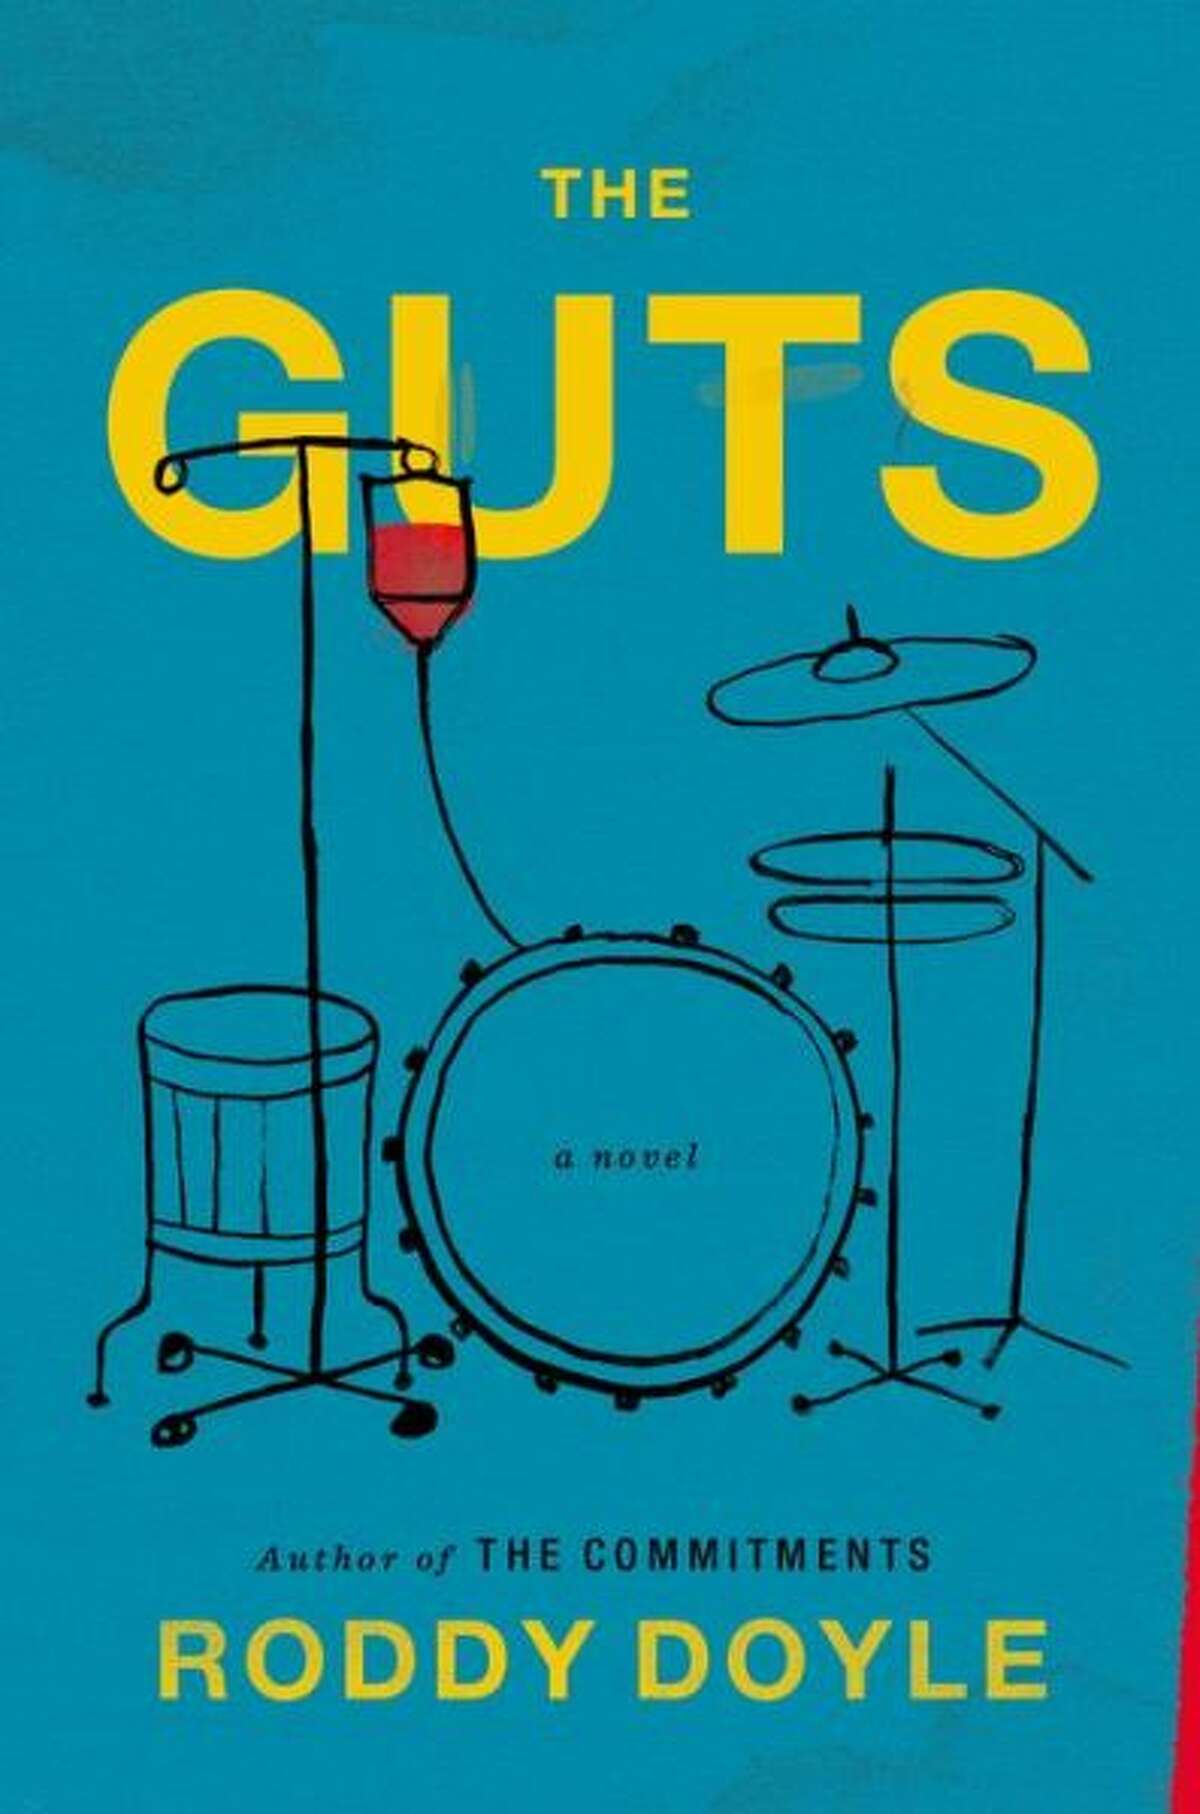 "The Guts" by Roddy Doyle